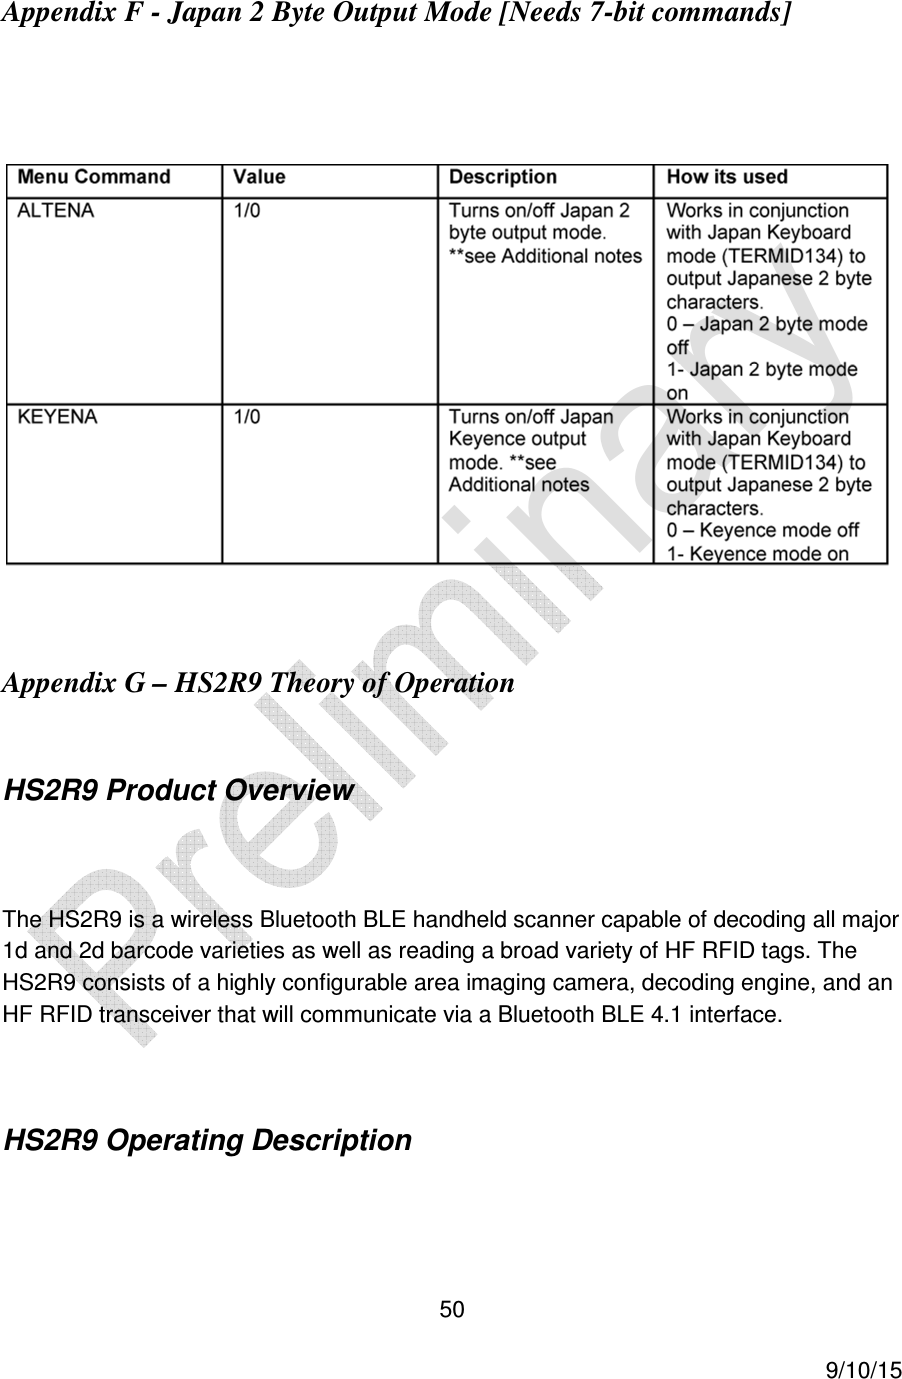  50     9/10/15 Appendix F - Japan 2 Byte Output Mode [Needs 7-bit commands]     Appendix G – HS2R9 Theory of Operation  HS2R9 Product Overview  The HS2R9 is a wireless Bluetooth BLE handheld scanner capable of decoding all major 1d and 2d barcode varieties as well as reading a broad variety of HF RFID tags. The HS2R9 consists of a highly configurable area imaging camera, decoding engine, and an HF RFID transceiver that will communicate via a Bluetooth BLE 4.1 interface.  HS2R9 Operating Description  